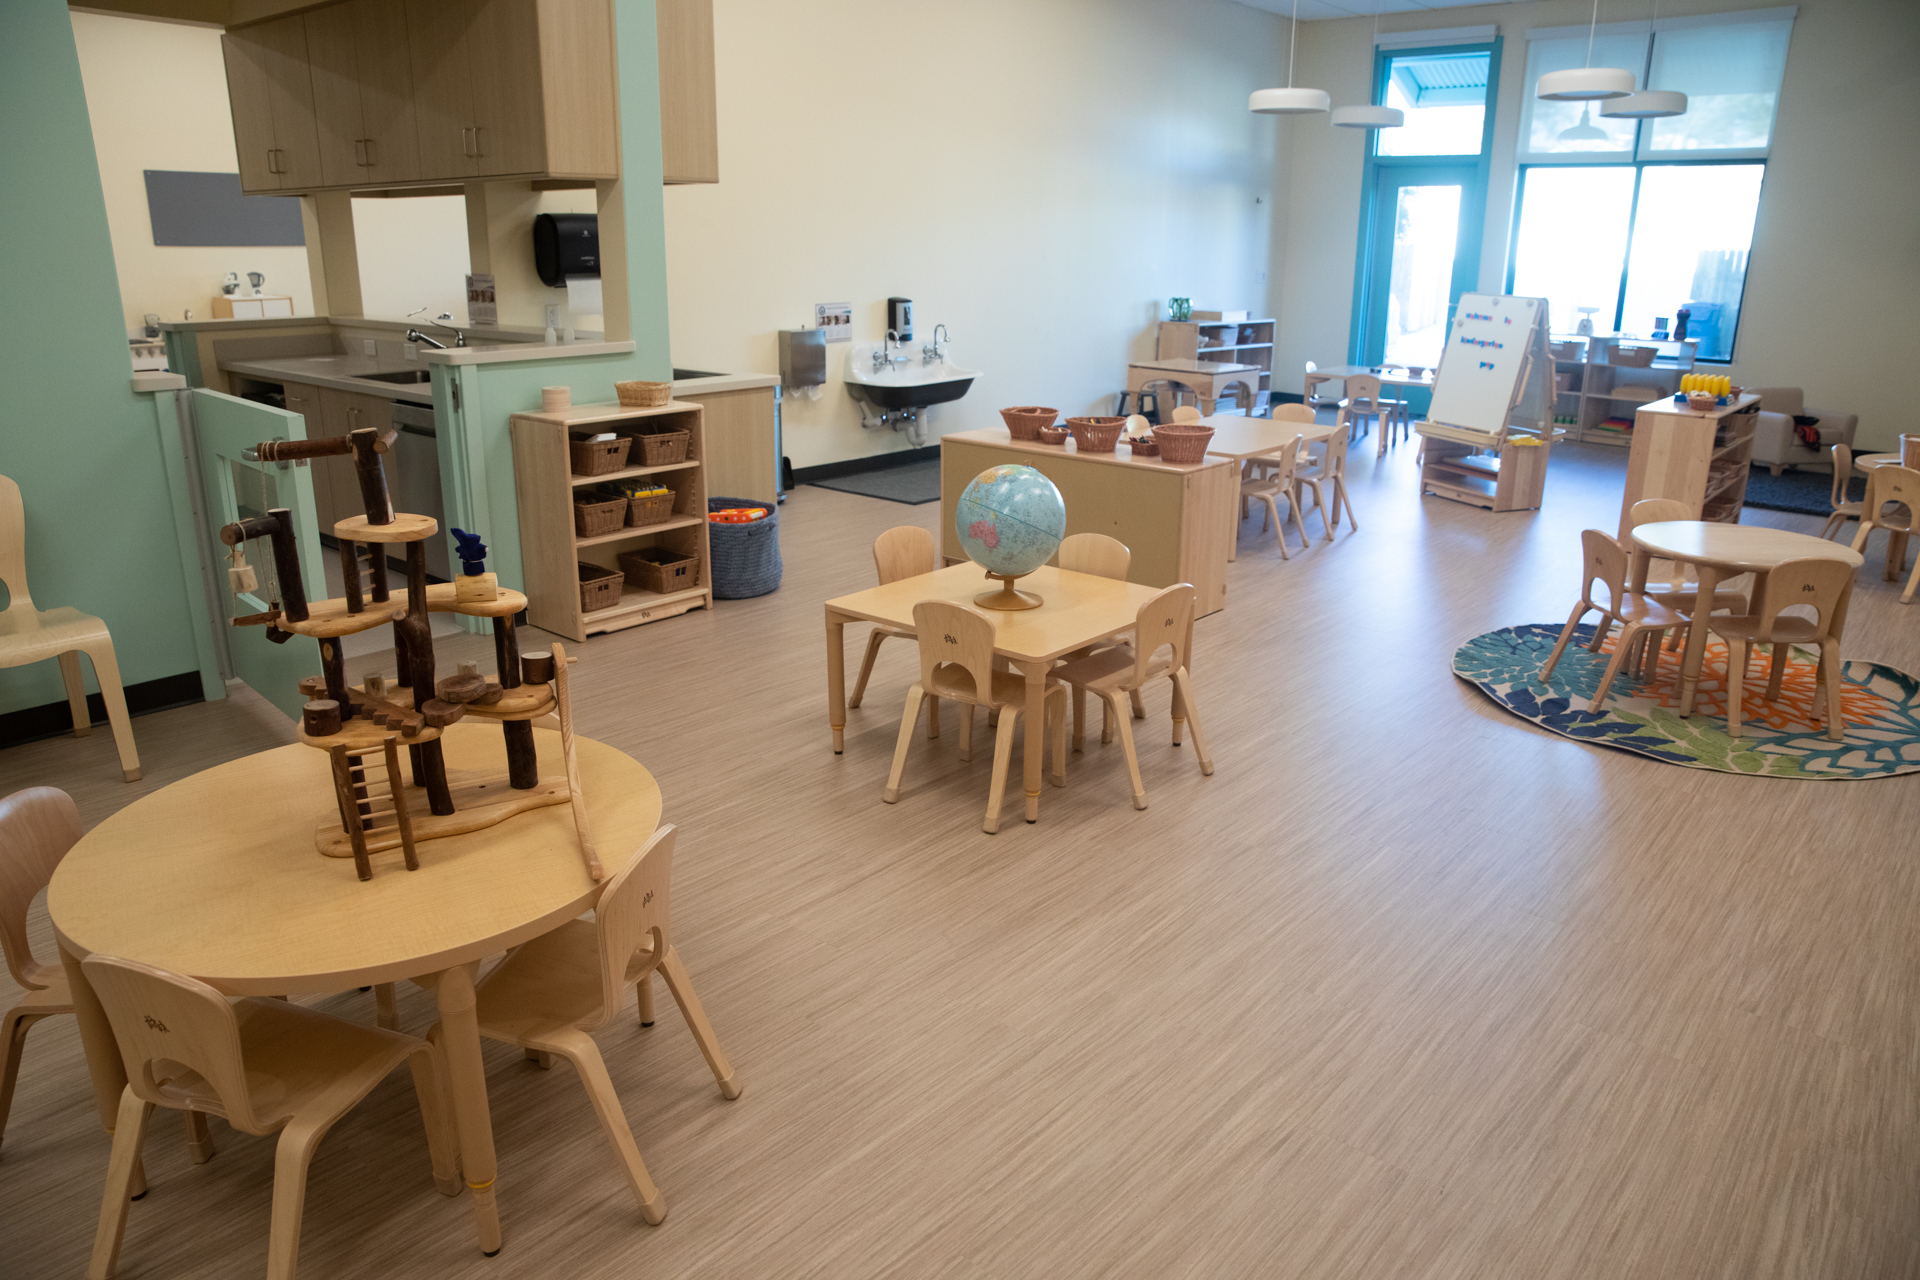 Inside the new Bright Path to Learning center, there are tables and chairs, learning toys and more for children.